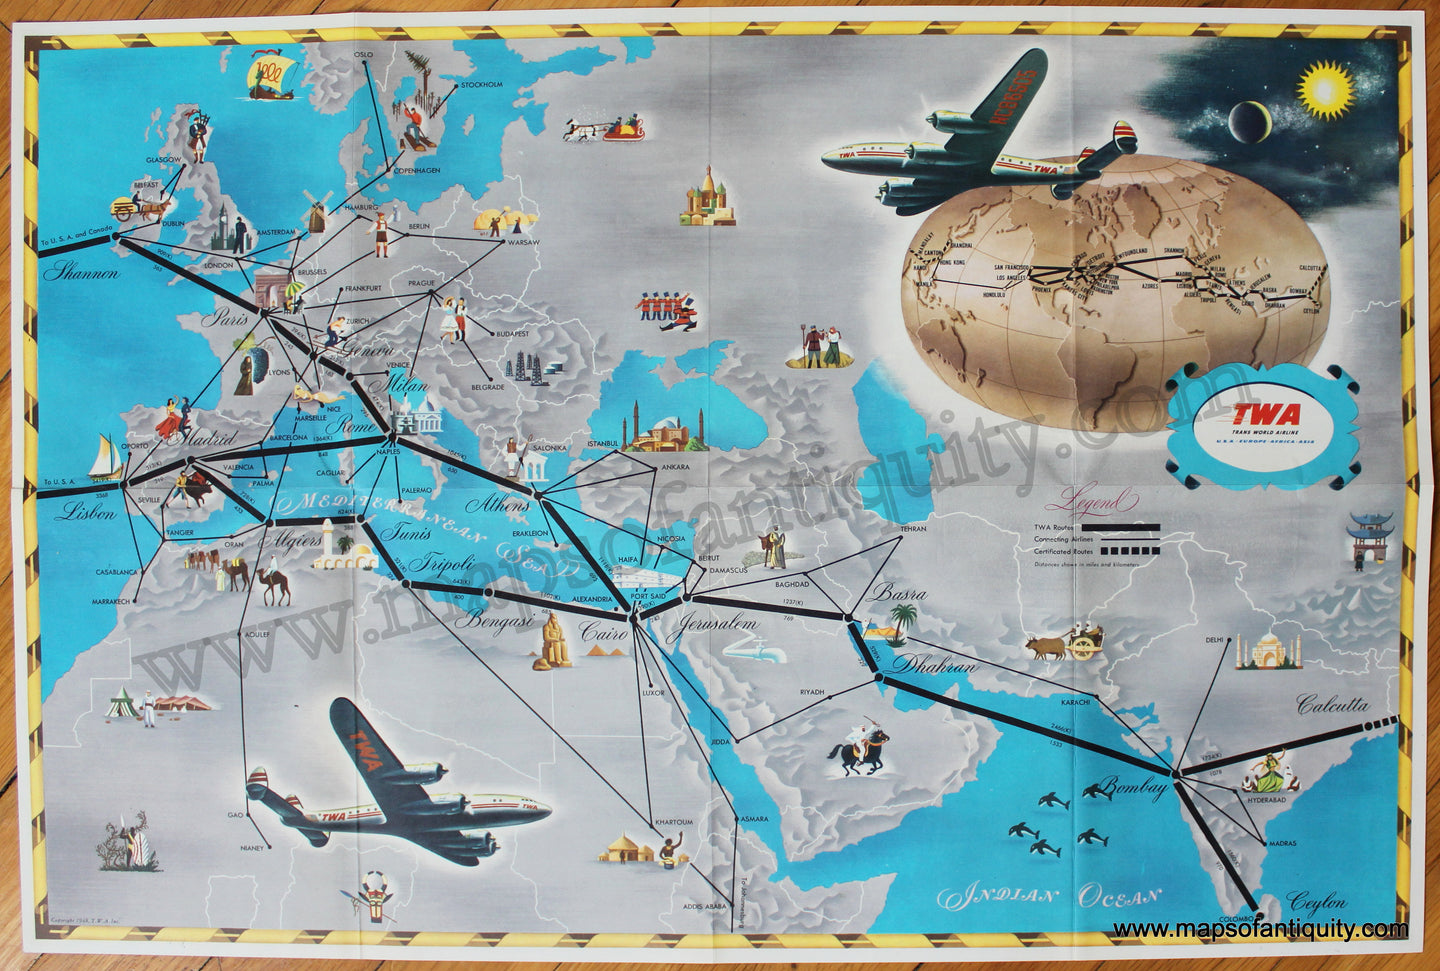 Antique-Printed-Color-Pictorial-Map-Two-sided-Trans-World-Airline-Pictorial-Map-1948-Trans-World-Airline-Flight-Route-1900s-20th-century-Maps-of-Antiquity